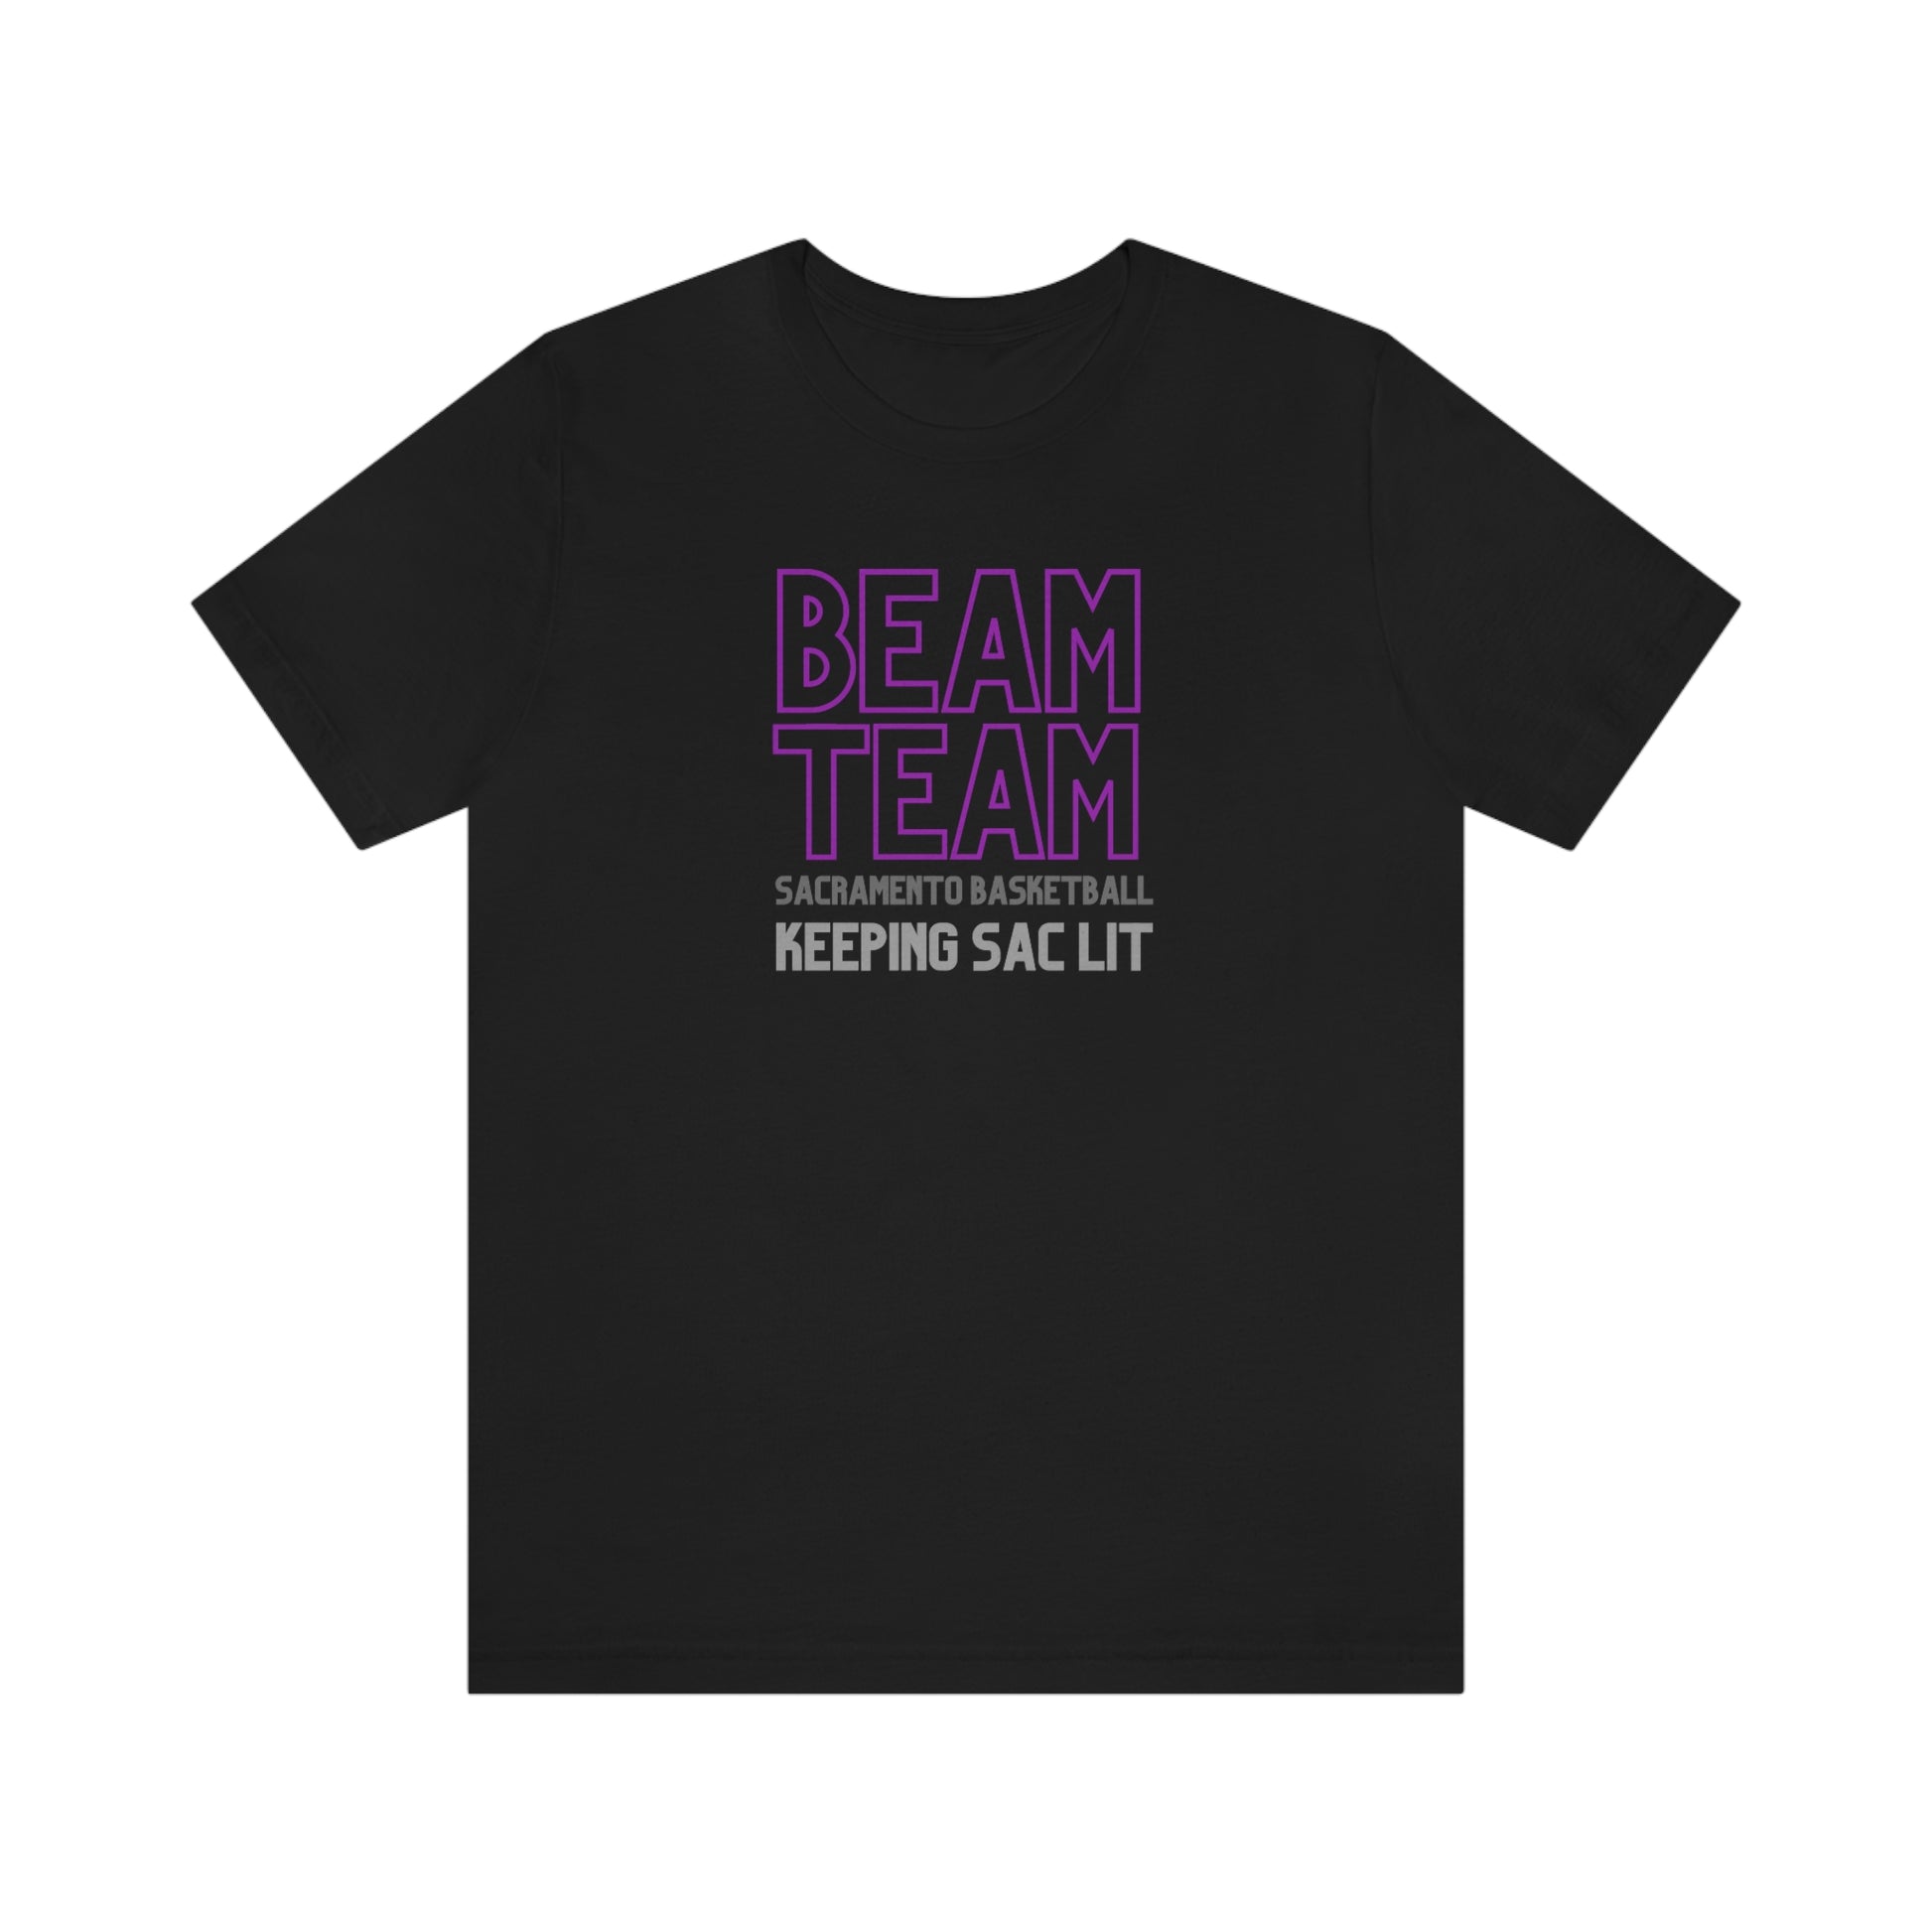 Beam Team, Light the Beam, Unisex T-Shirt, Sacramento Basketball, Kings Basketball Gift, Kings Fan Gift, Sacramento Basketball,Beam Team, Light the Beam! Celebrate another W - WIN - for your Kings Basketball team in this comfortable, cool t-shirt. Perfect to sport at the game or show off the day after another W. It's going to be an epic season for our Sacramento Basketball team - show off your Sac Beam Team pride.